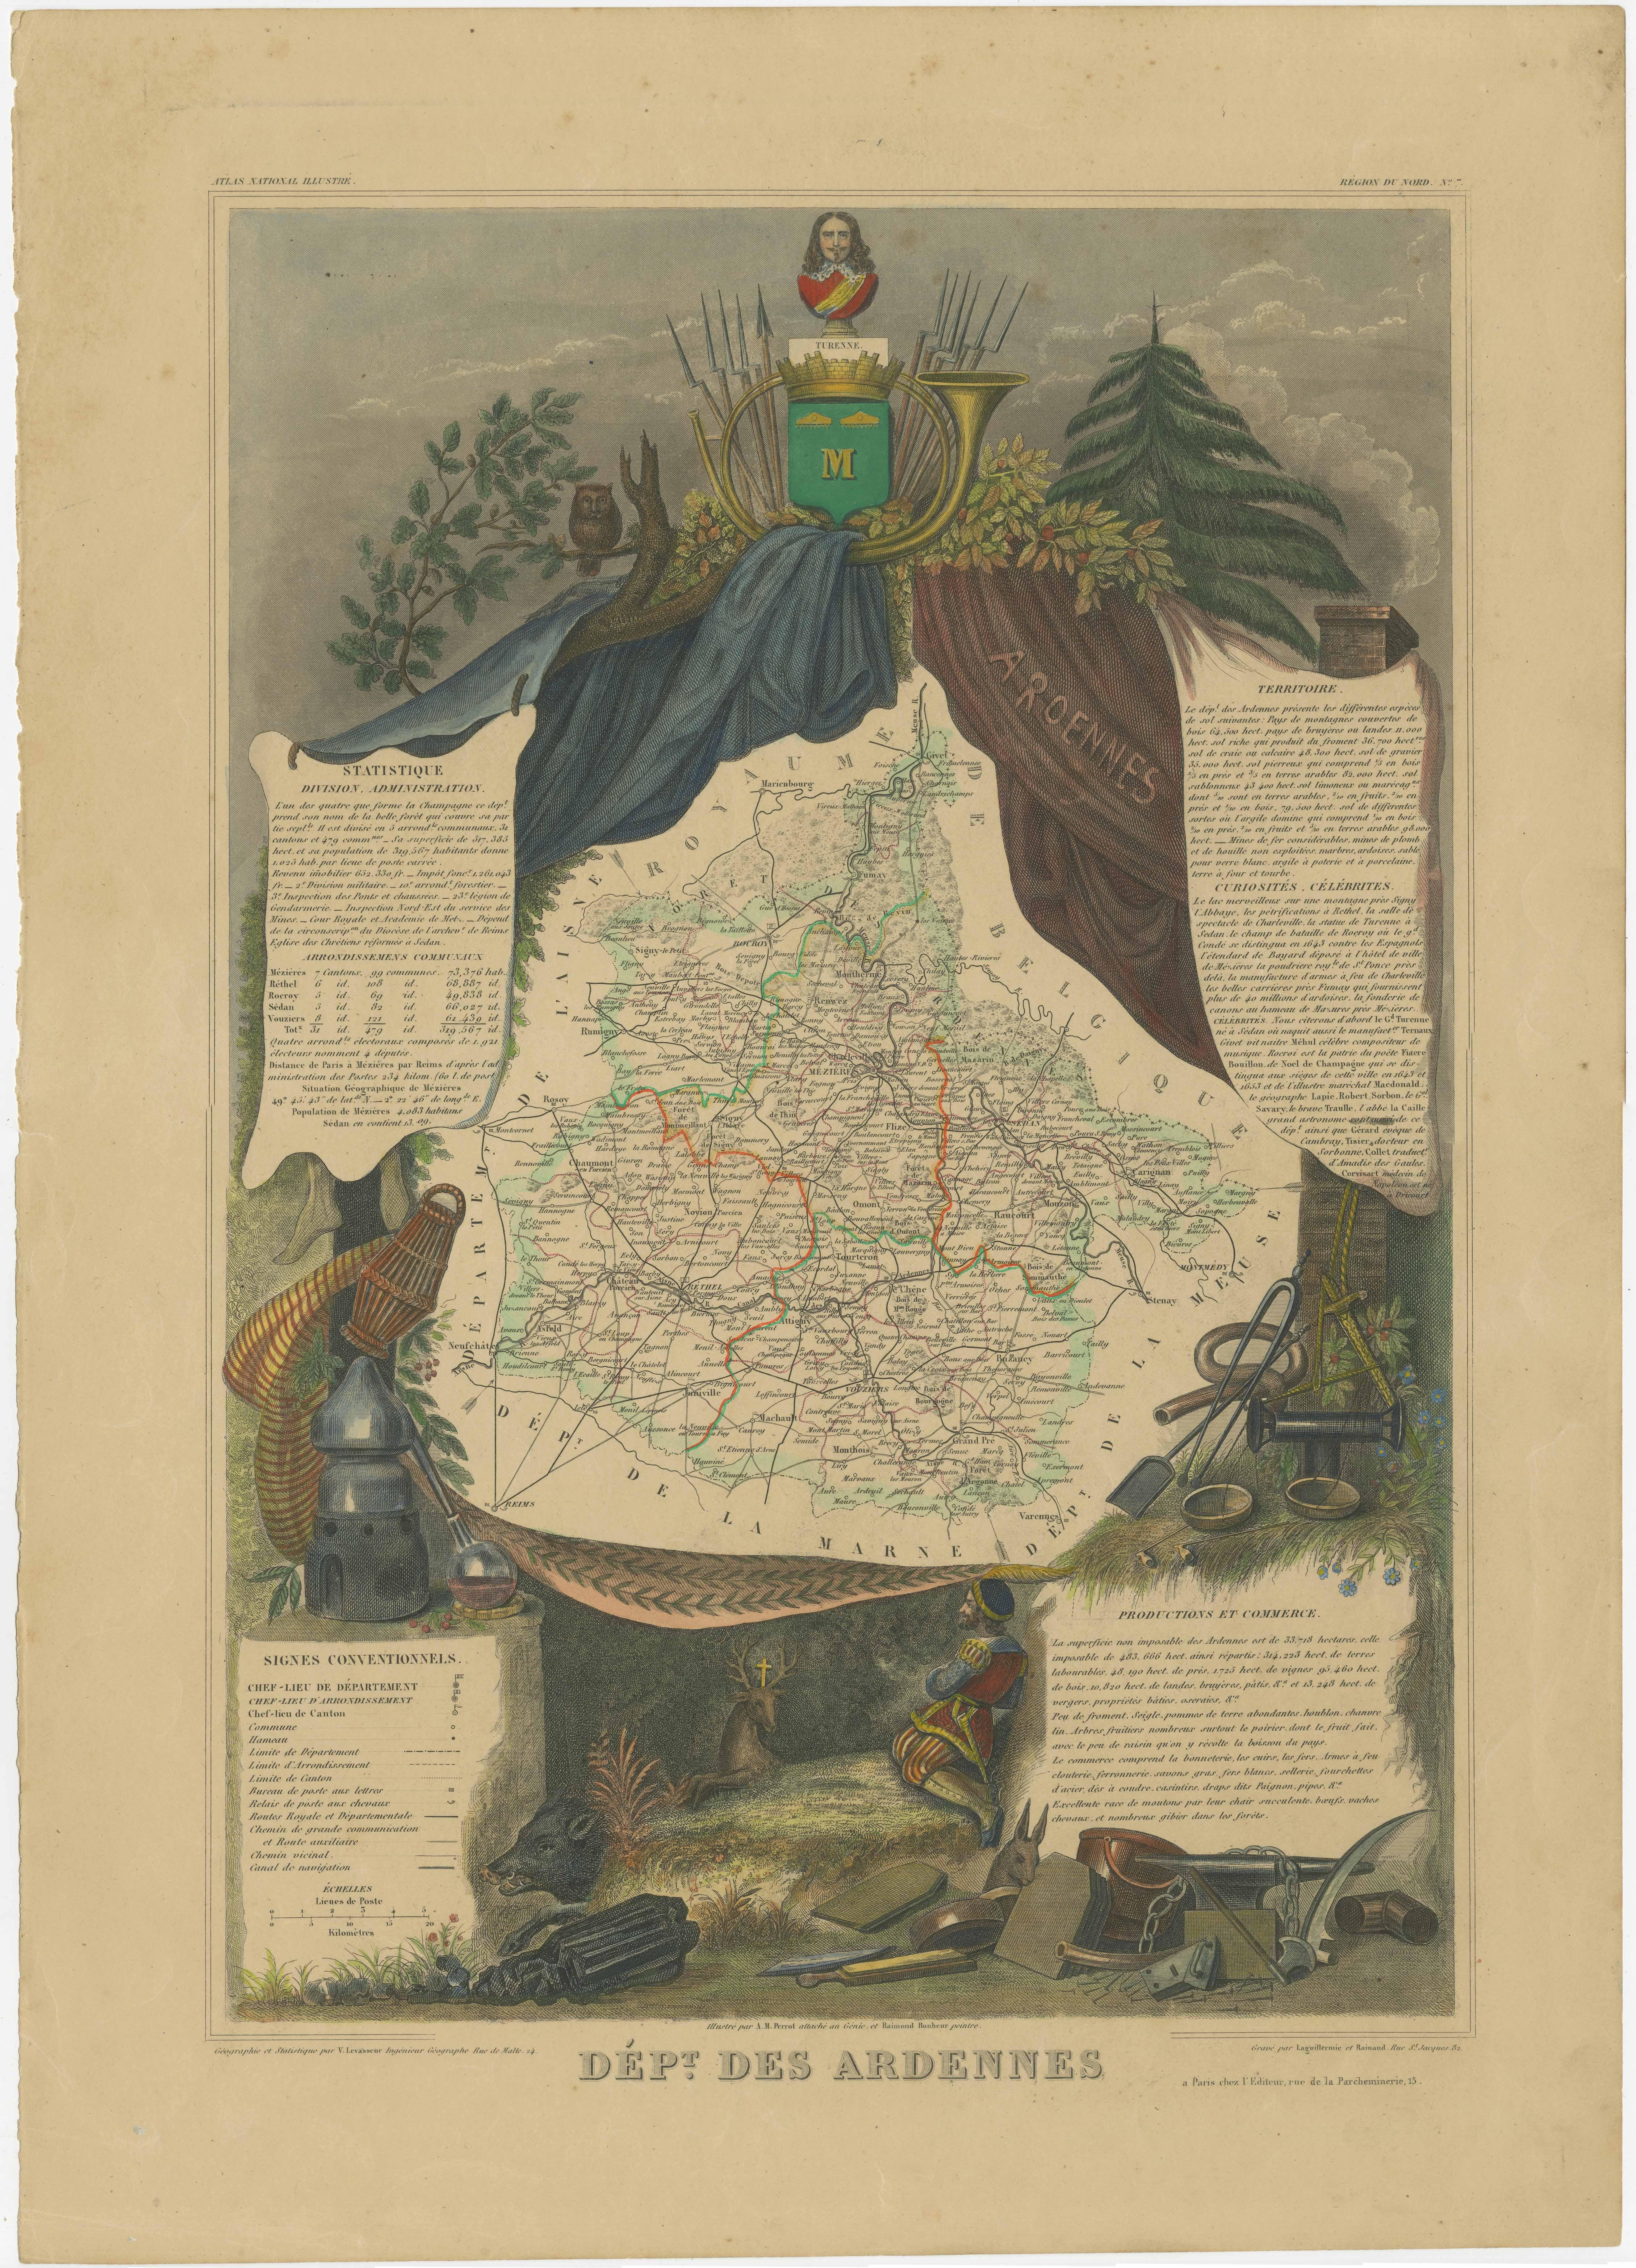 Antique map titled 'Dépt. des Ardennes'. Map of the French department of Ardennes, France. Part of France's important Champagne producing region. The whole is surrounded by elaborate decorative engravings designed to illustrate both the natural